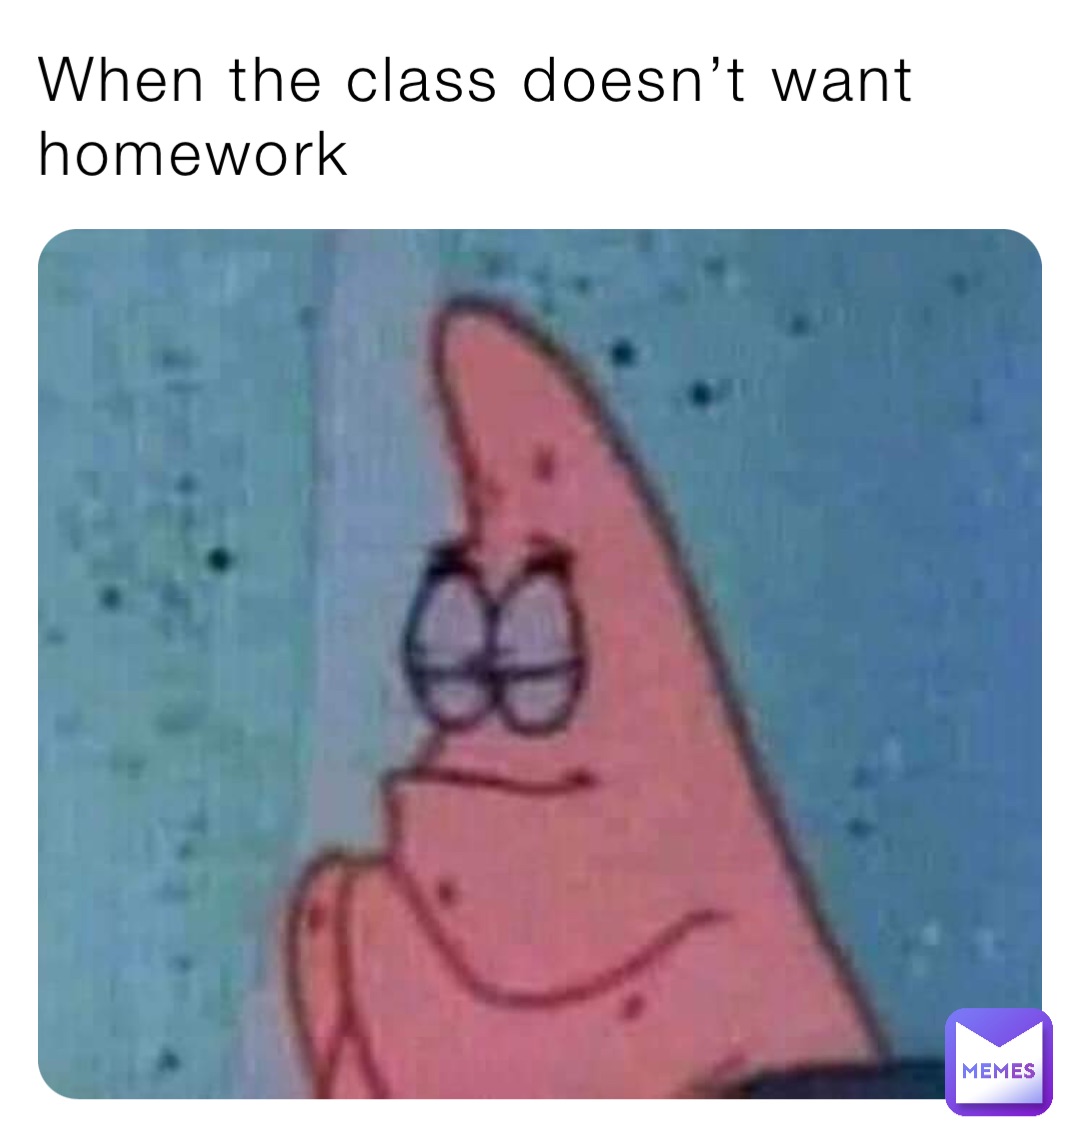 When the class doesn’t want homework